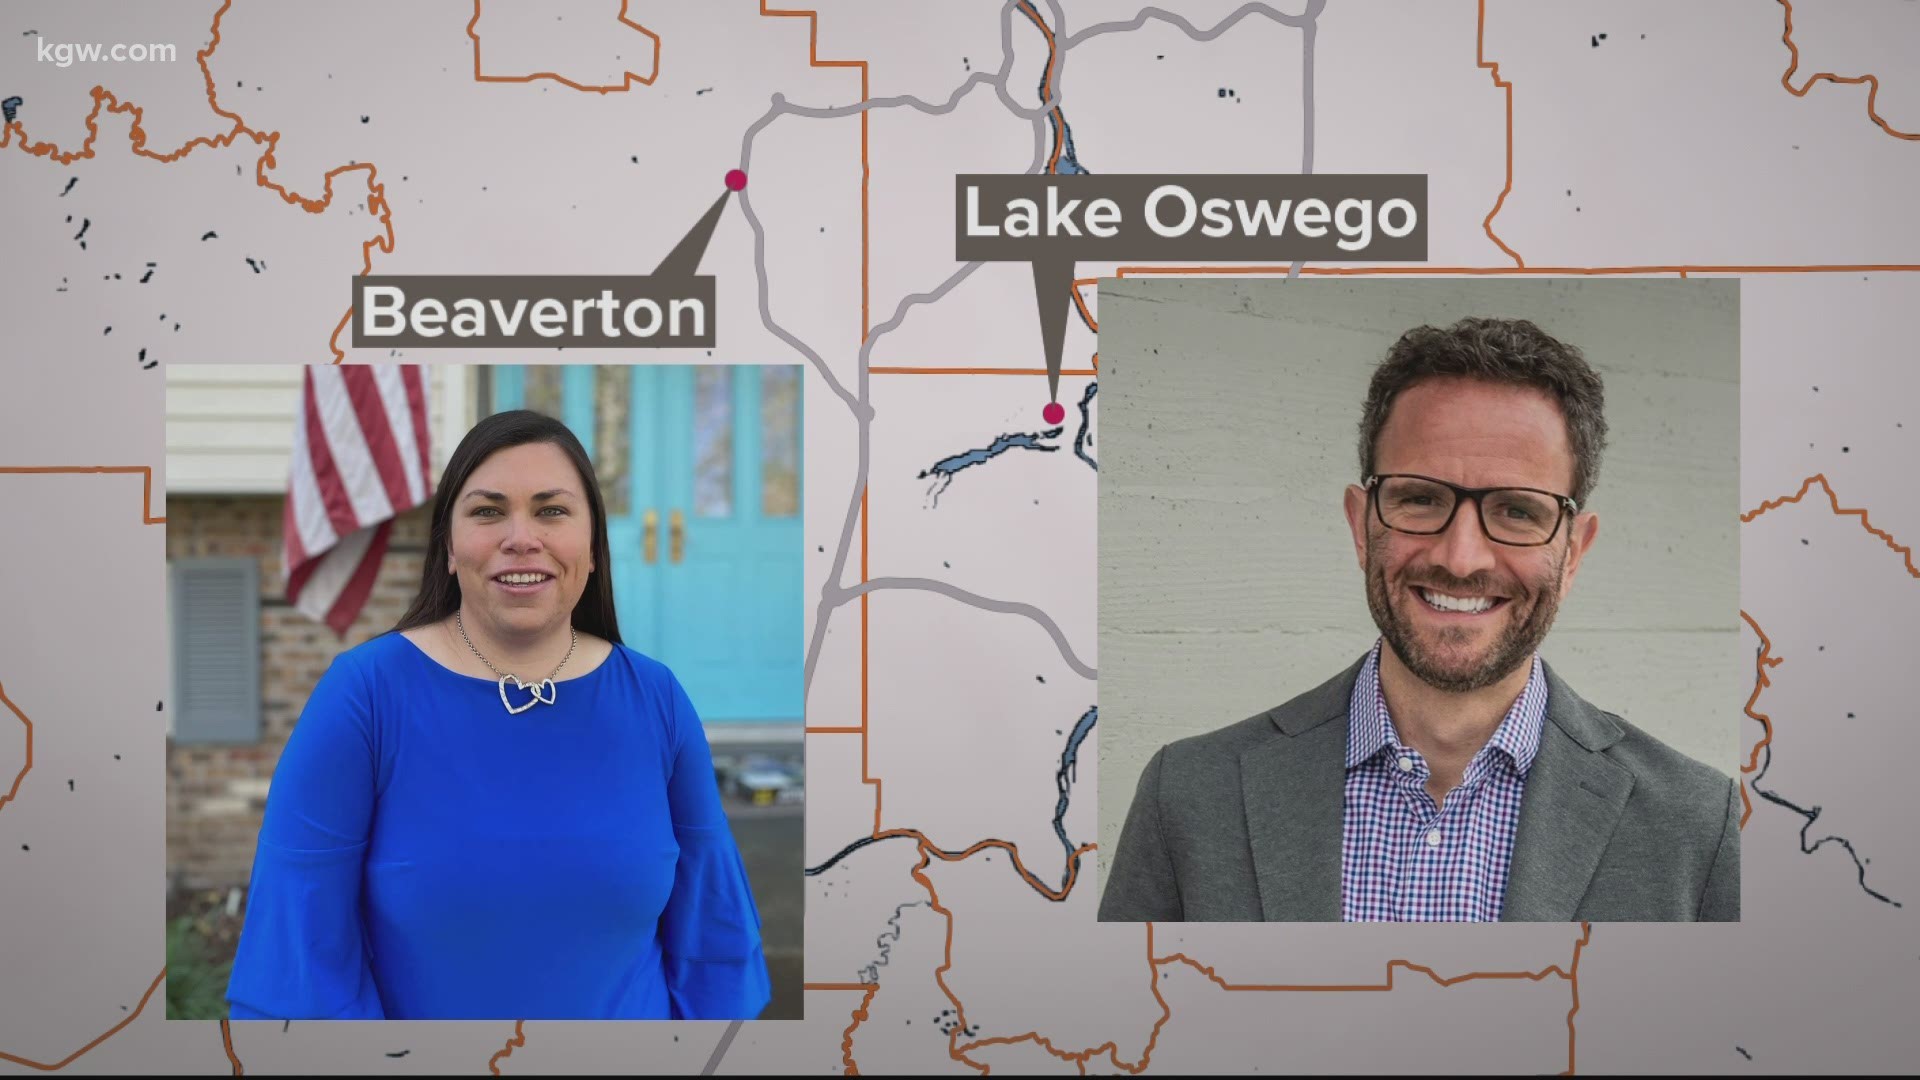 We spoke to the new mayors of Beaverton and Lake Oswego and checked in on the still too-close-to-call mayoral race in Gresham.